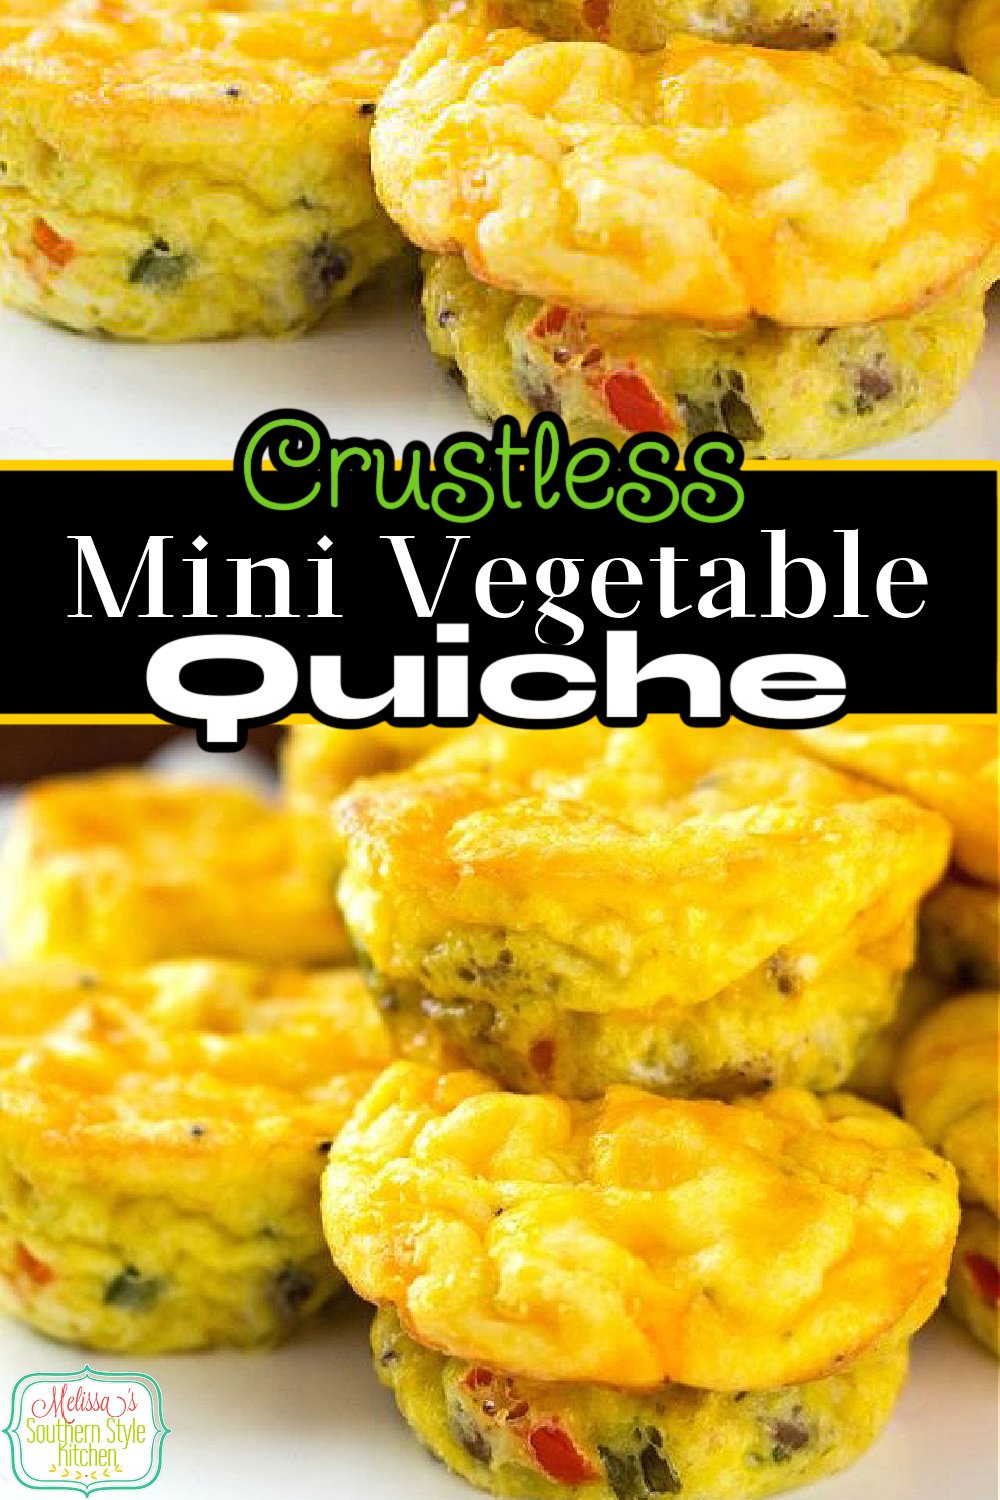 Make Crustless Mini Vegetable Quiche in a muffin pan and you can personalize each one to your taste #muffineggs #quicherecipes #muffinpanrecipes #eggmuffins #eggs #muffinrecipes #lowcarb #ketorecipes #vegetablequiche via @melissasssk